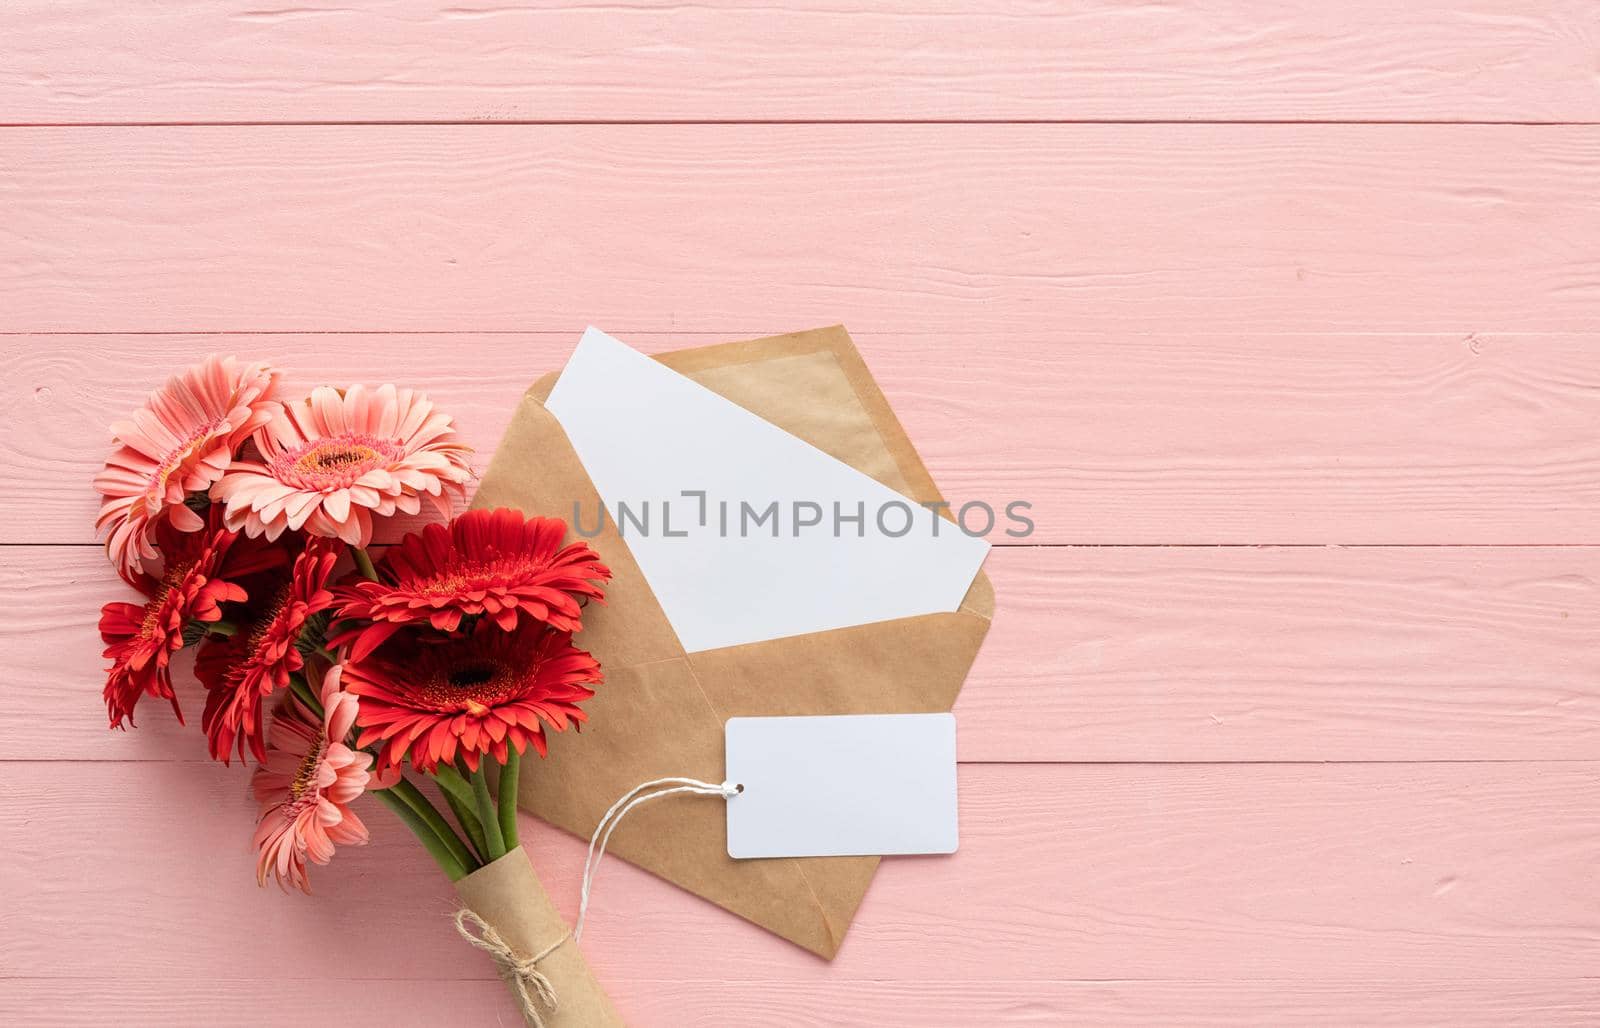 Happy birthday. Red gerbera daisy flowers, envelope and blank label tag on pink wooden table